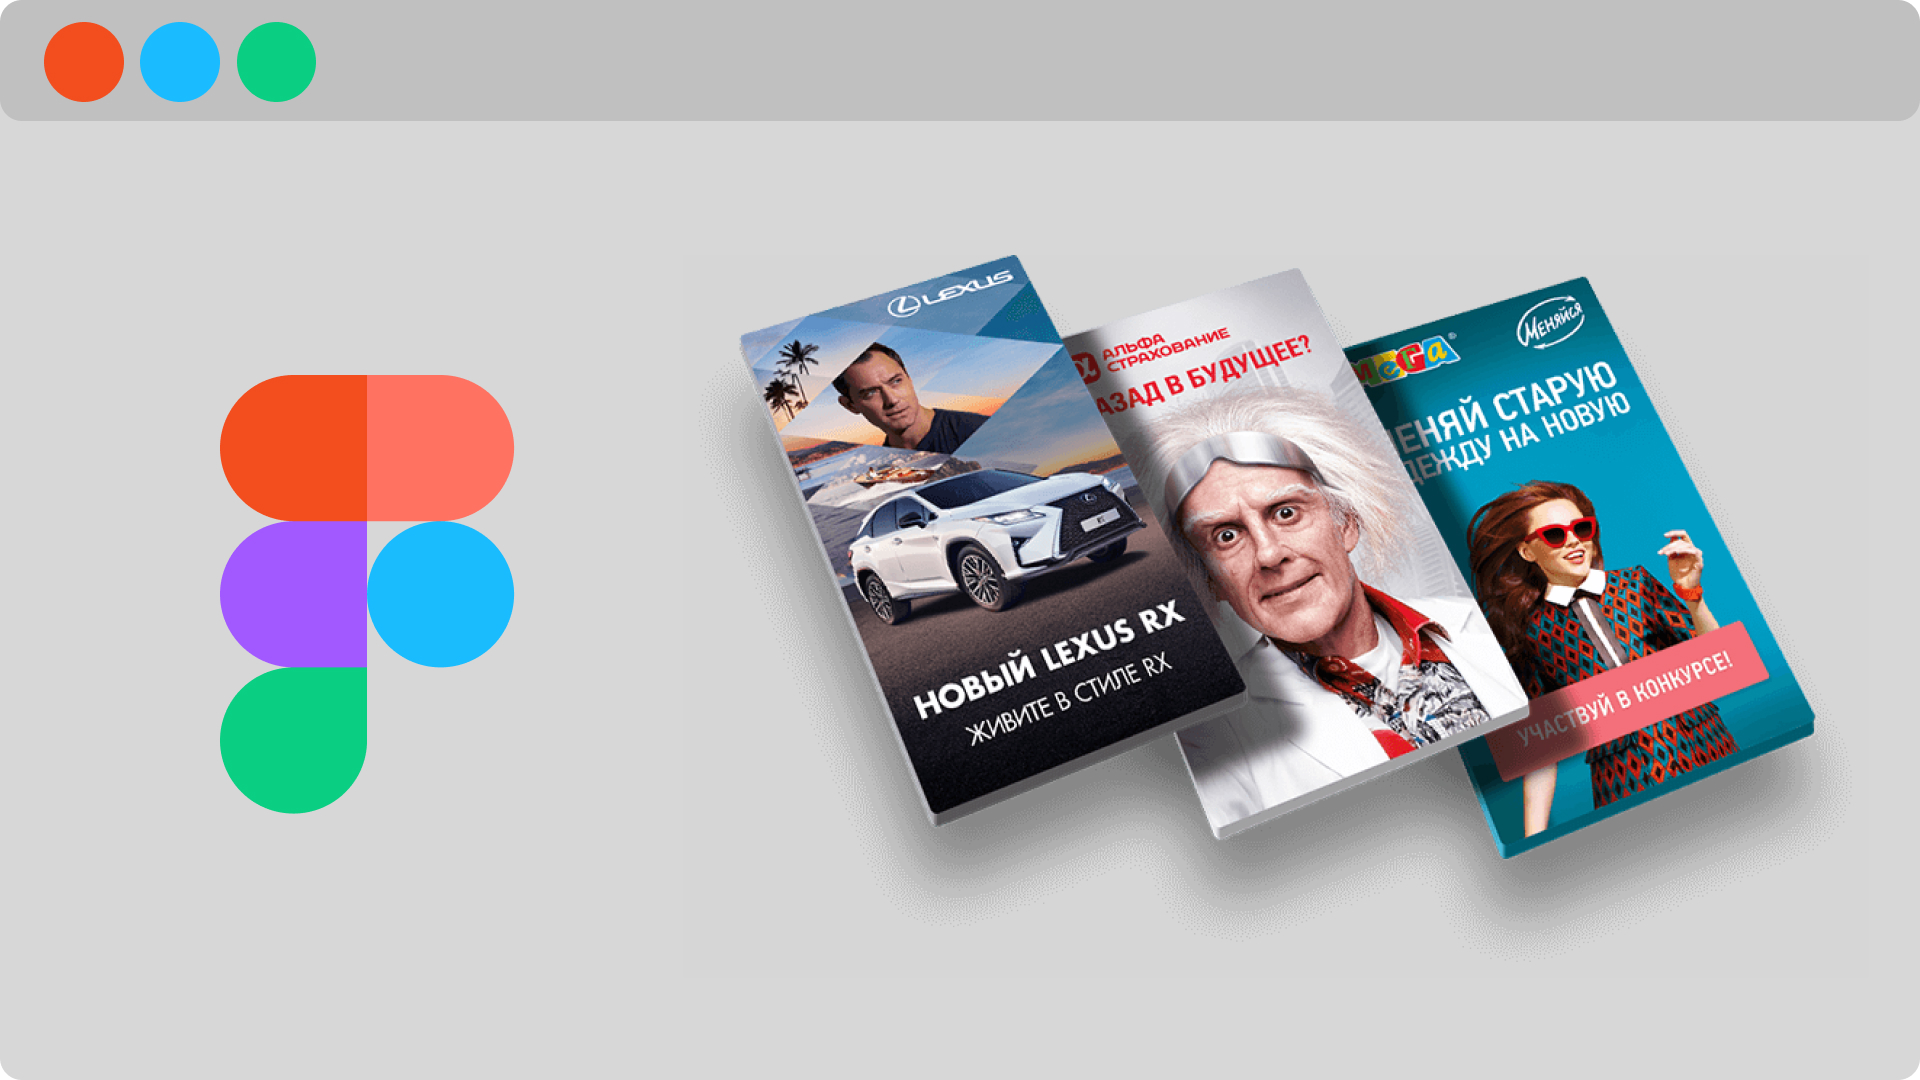 How to use our Figma plugin to animate banners in 1 click